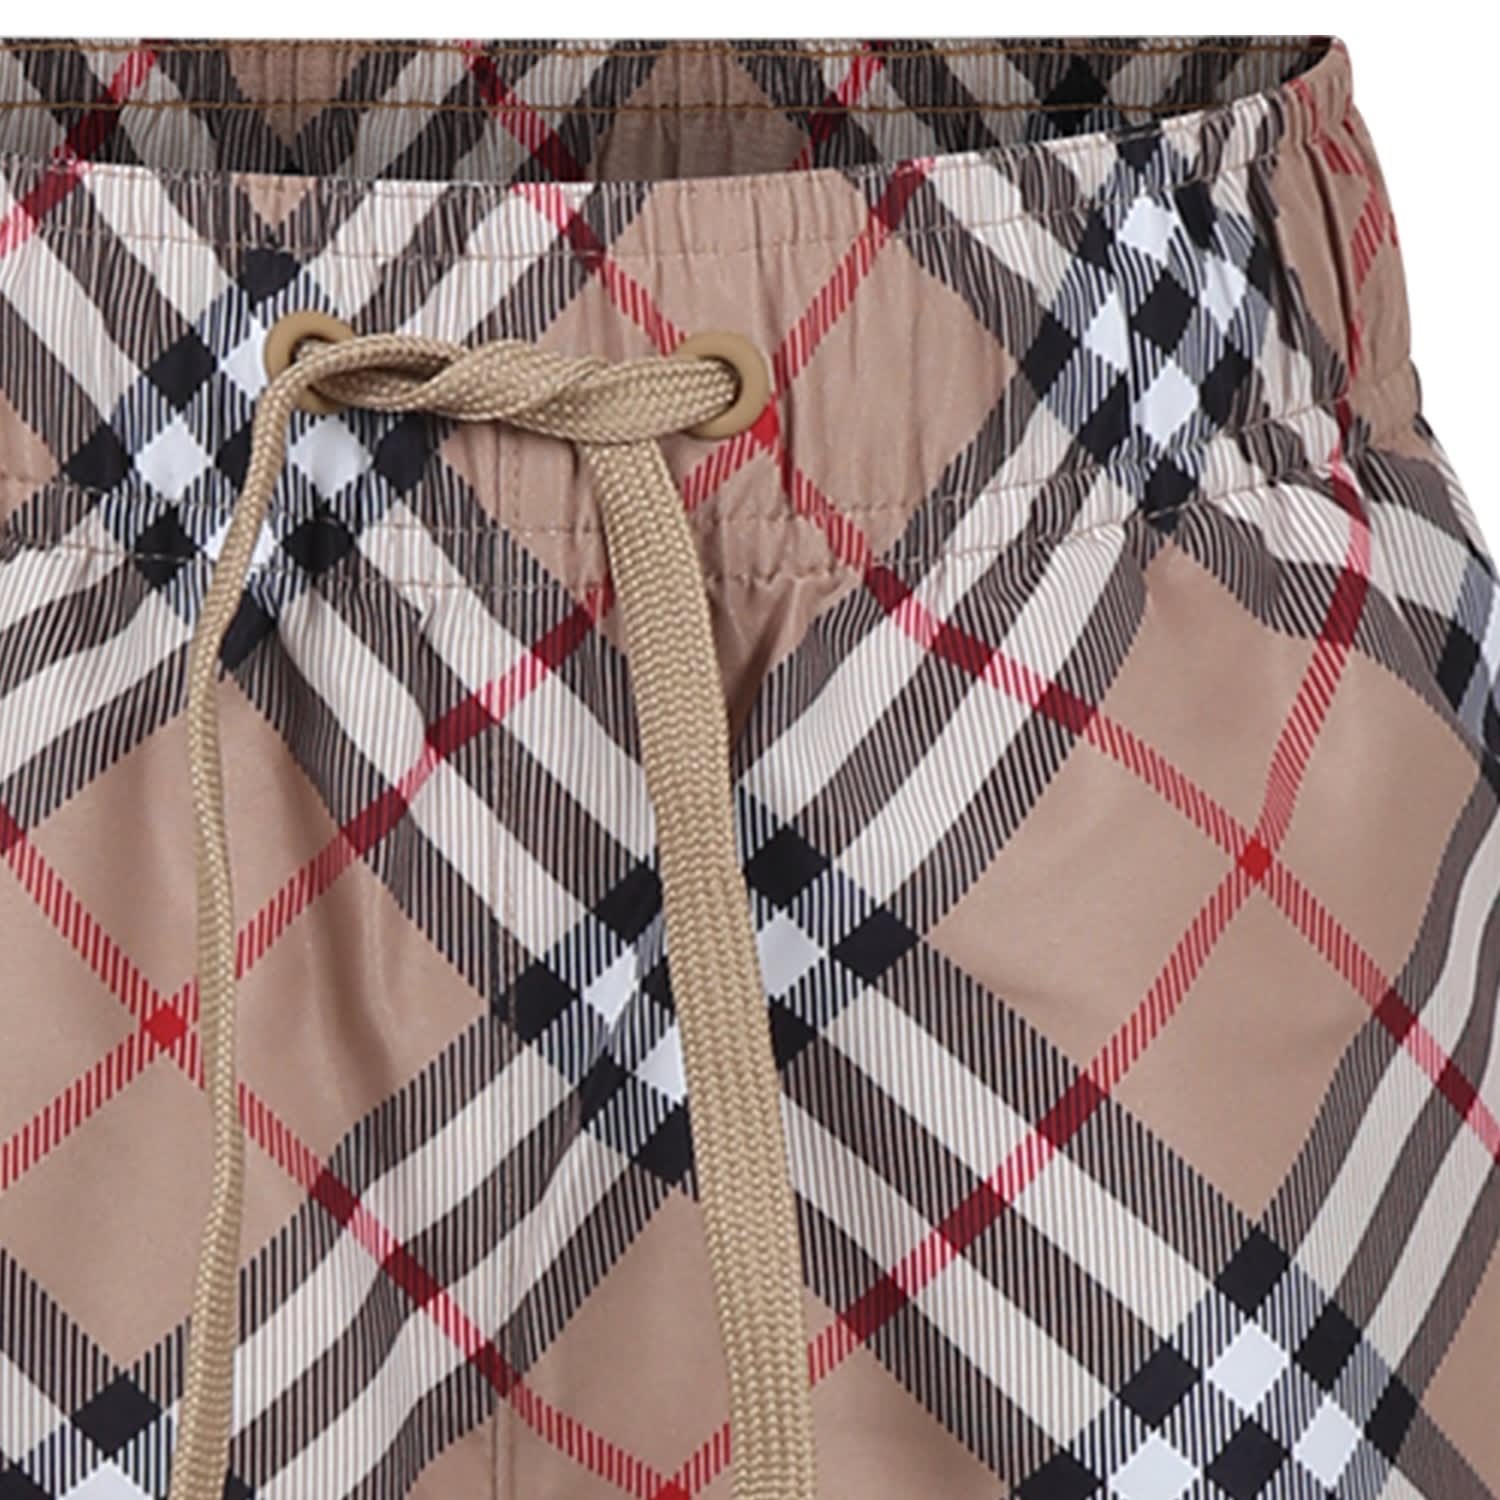 Shop Burberry Beige Swimsuit For Boy With Vintage Check